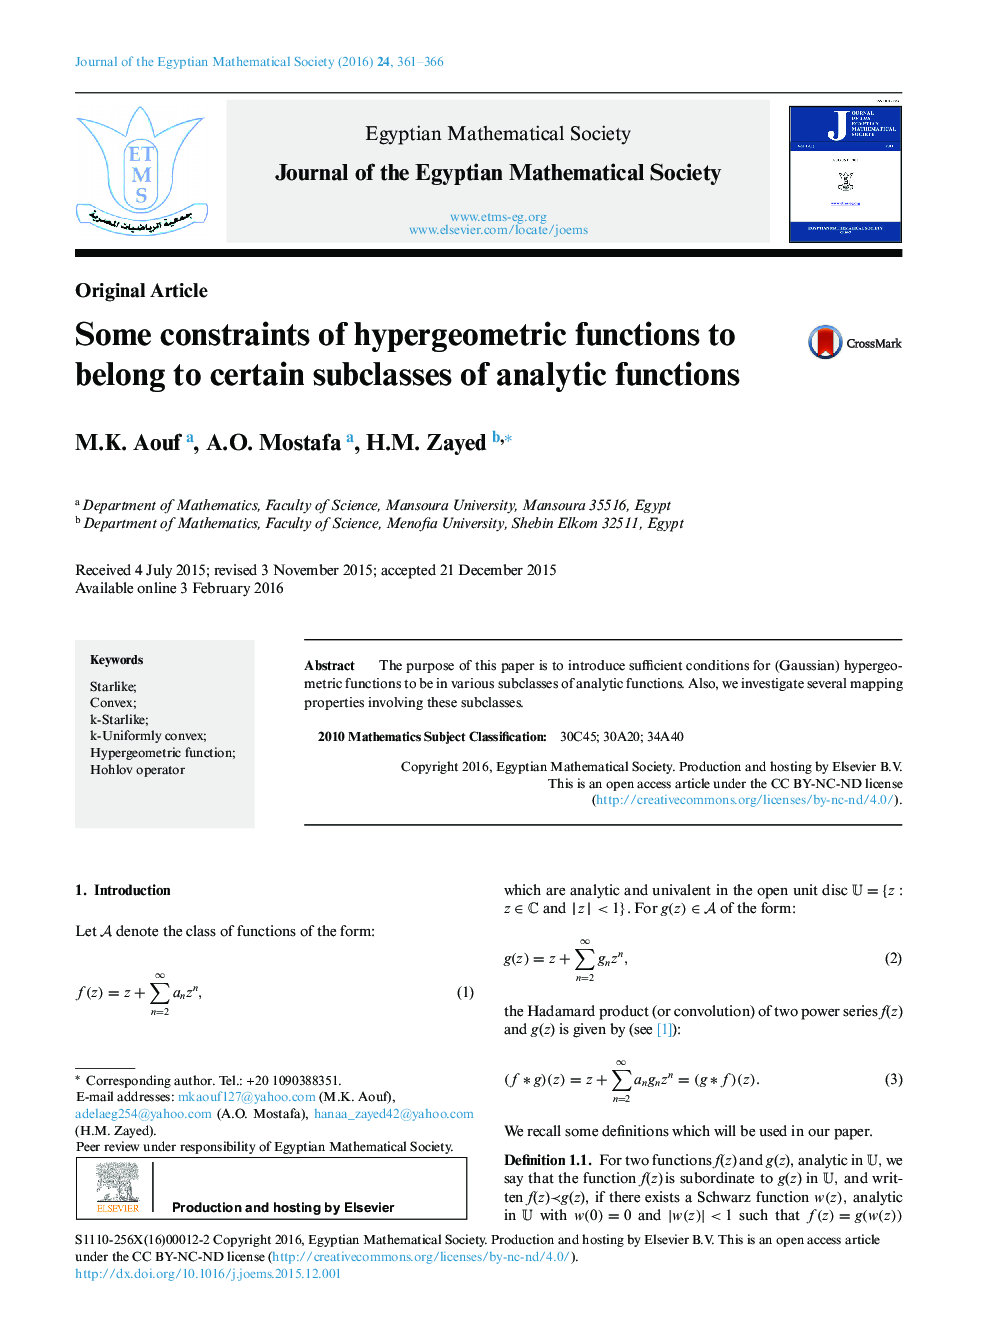 Some constraints of hypergeometric functions to belong to certain subclasses of analytic functions